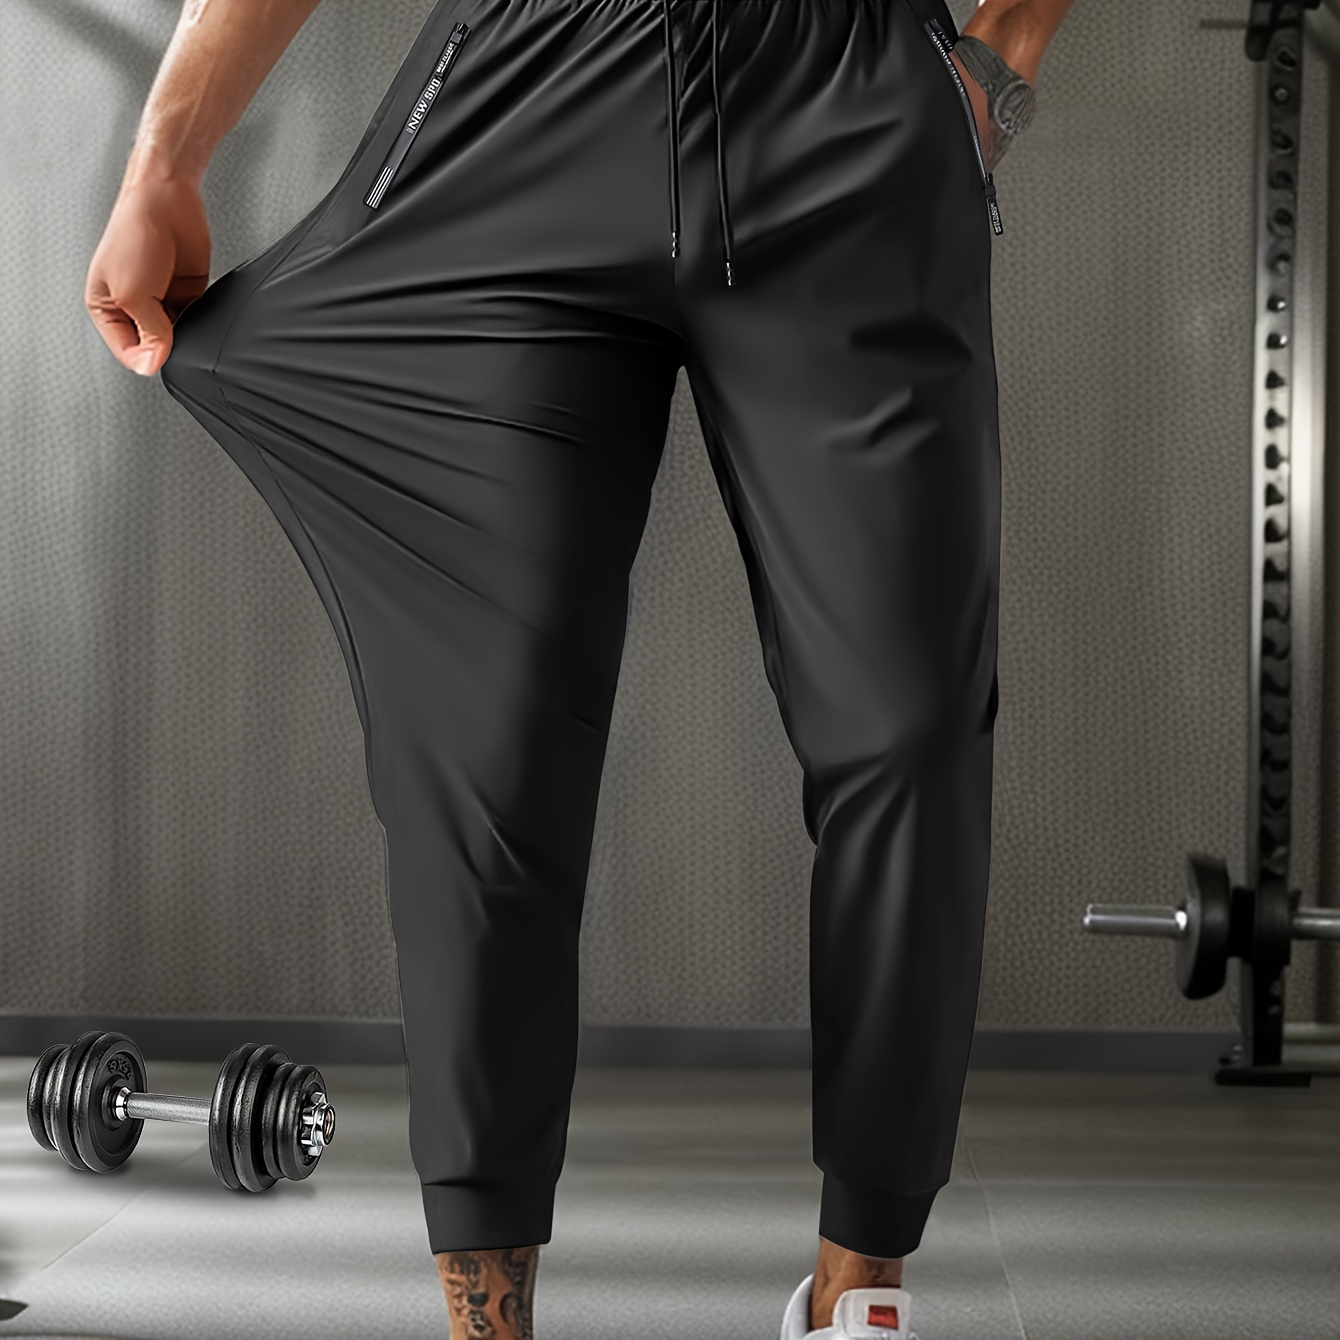 

Men's Solid Regular Fit And Cuffed Sweatpants With Drawstring And Pockets, Breathable And Stretchable Comfy Pants For Sports Wear And Outdoors Activities